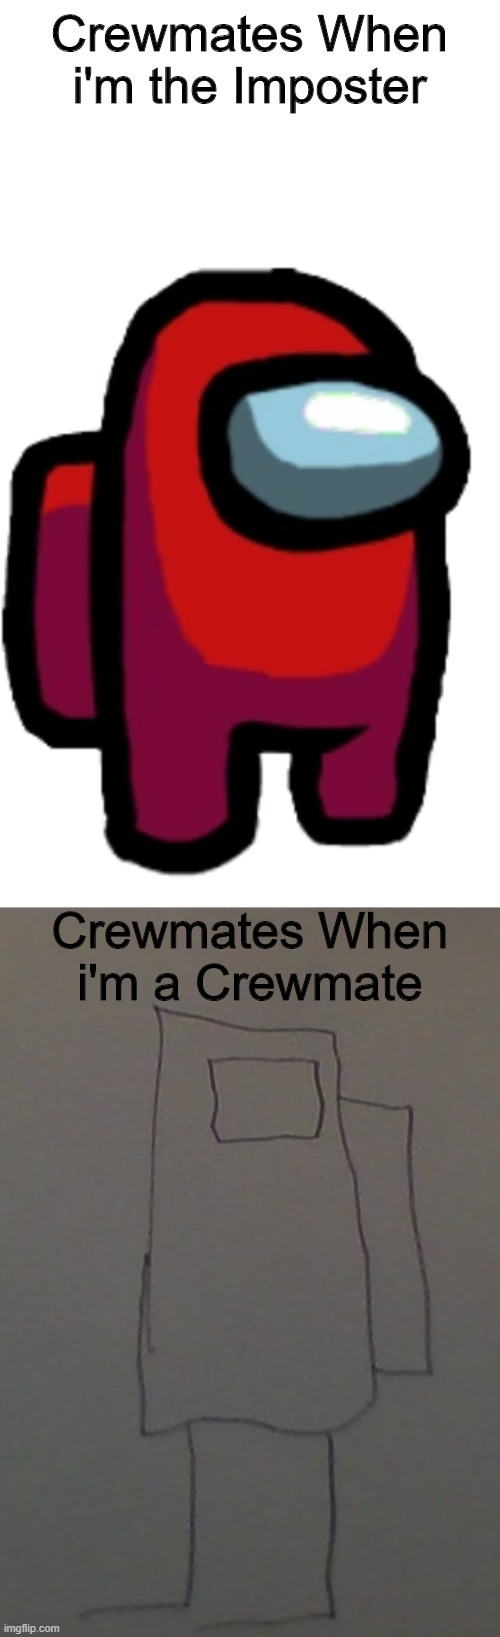 Among Us in a Nutshell | Crewmates When i'm the Imposter; Crewmates When i'm a Crewmate | image tagged in among us,emergency meeting among us,there is one impostor among us | made w/ Imgflip meme maker